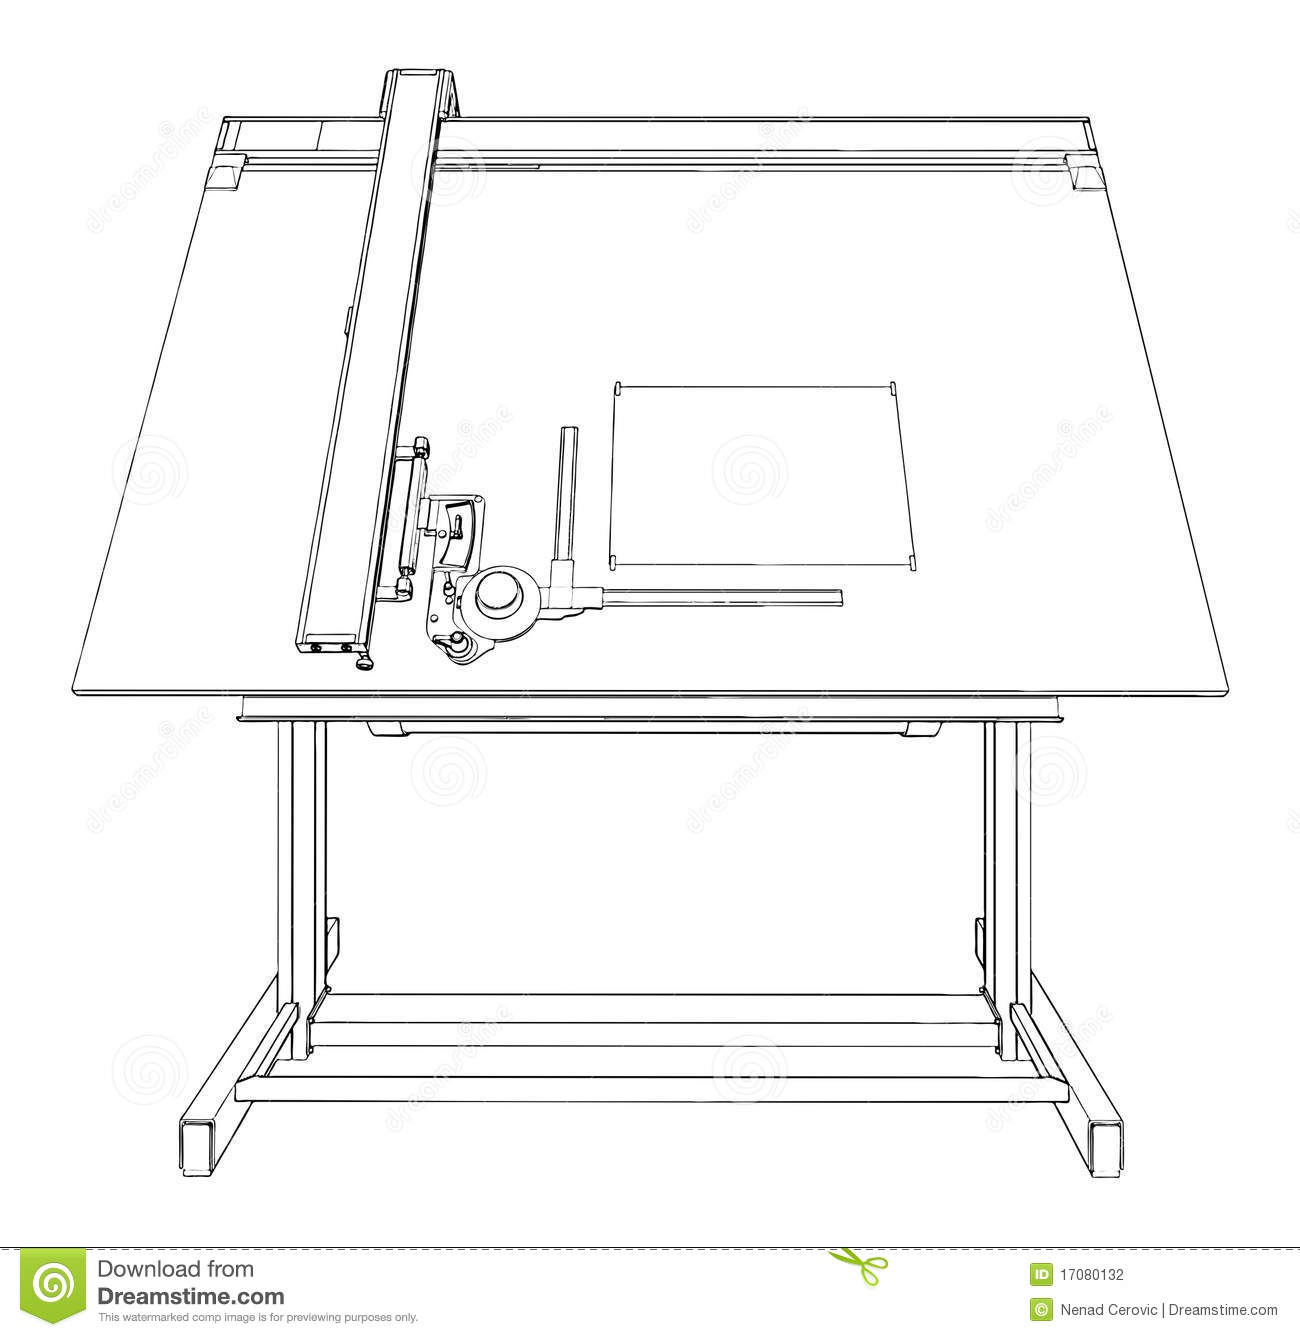 Architect clipart drafting table, Architect drafting table Transparent